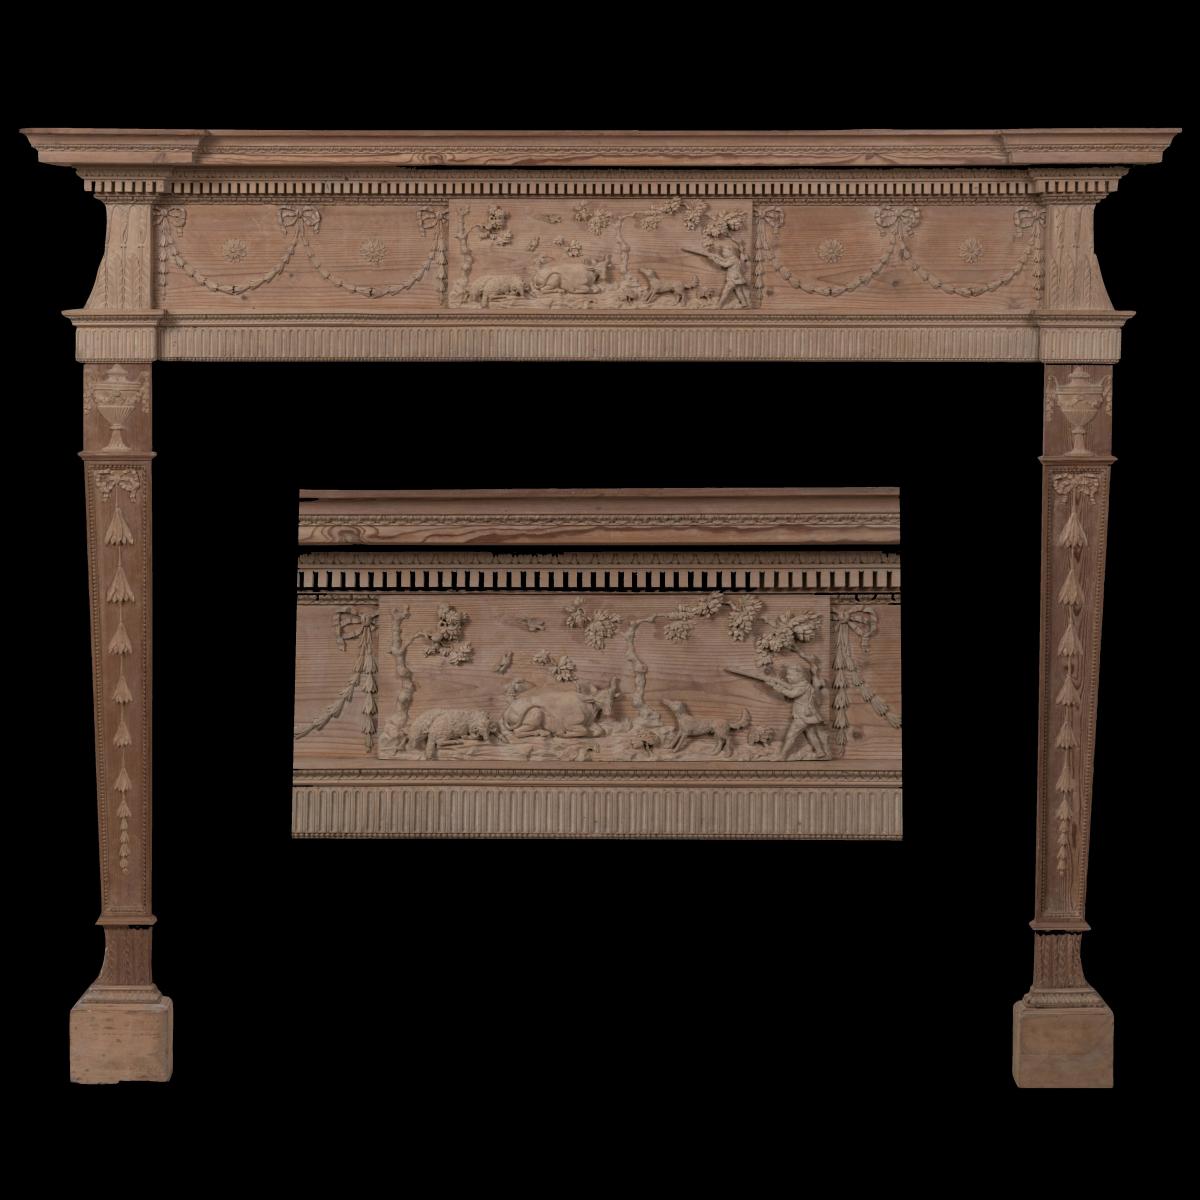 An 18th century English pine and limewood chimneypiece